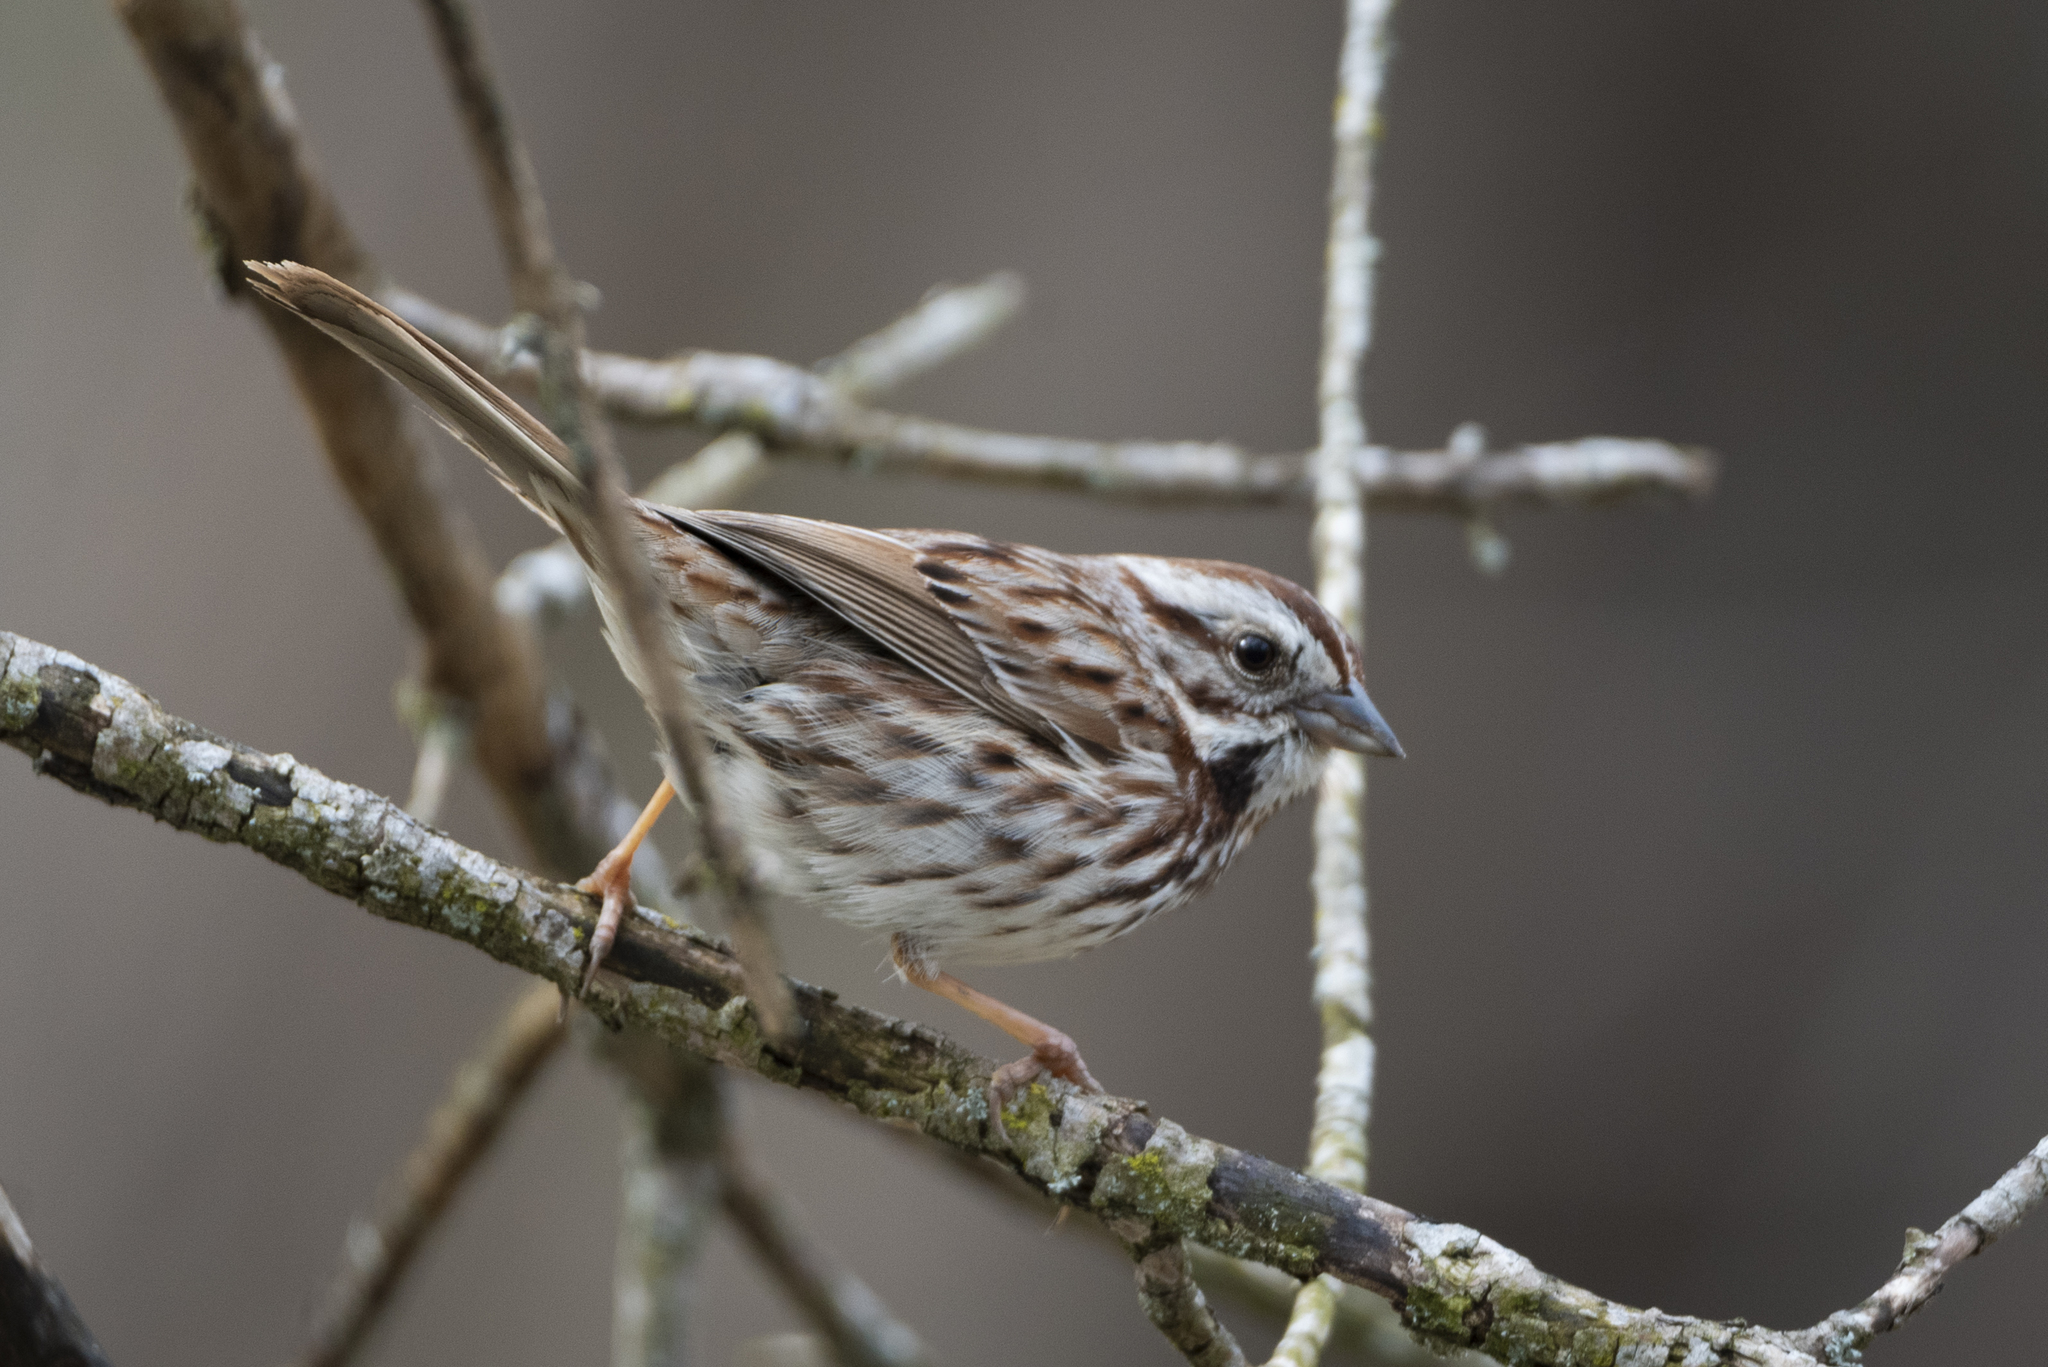 The song sparrow has a fairly medium bill, a long tail, and its breast and sides are white with dark streaks.